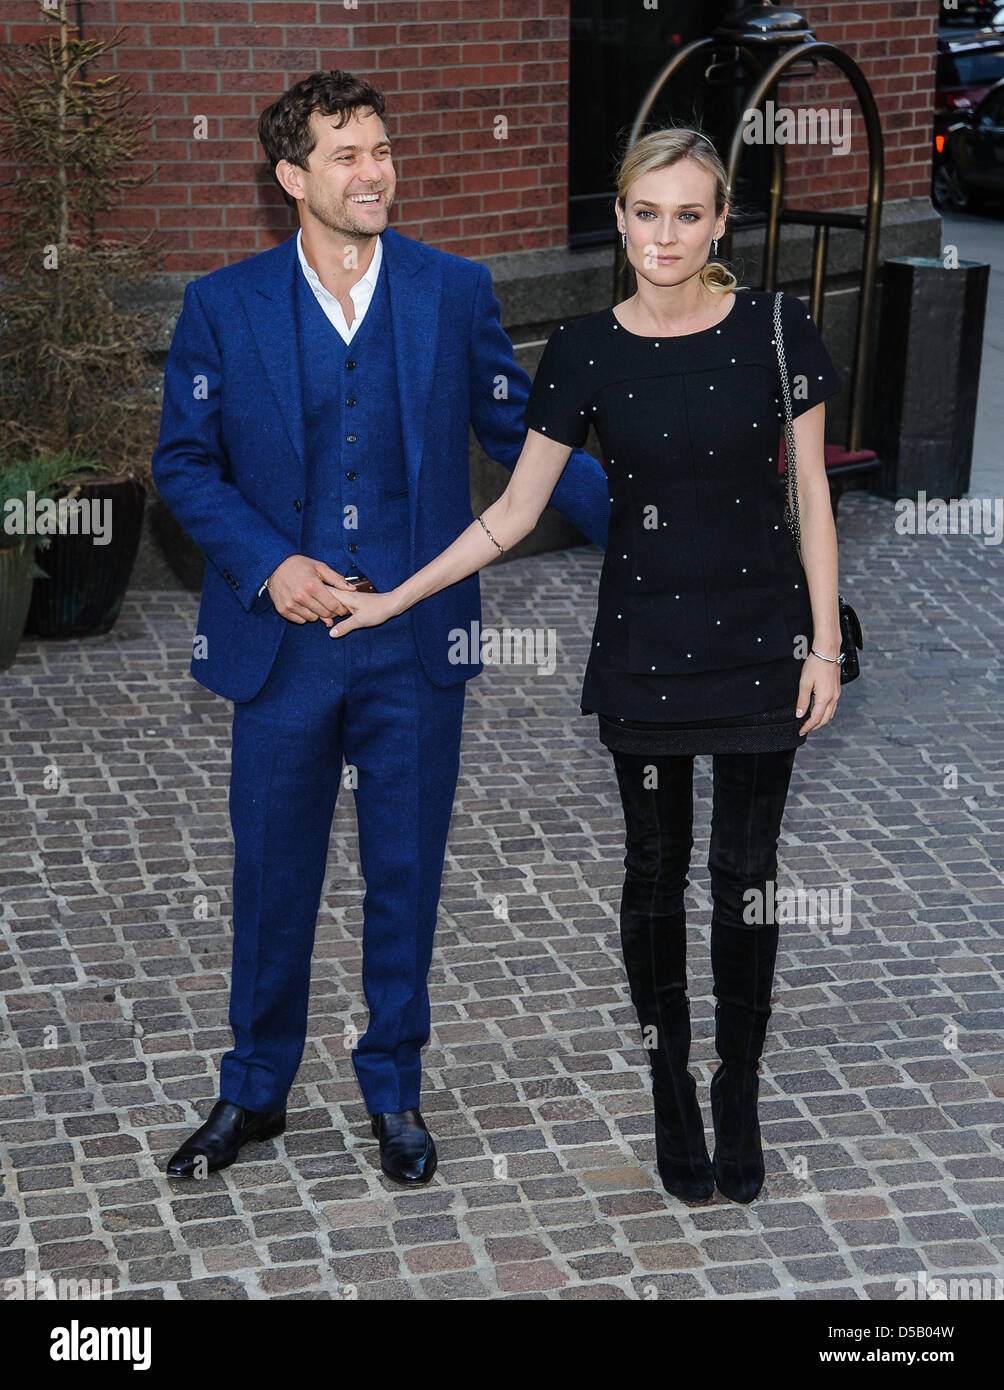 New York, USA. 27th March 2013.  Joshua Jackson and Diane Kruger arrive at The Tribeca Grand Hotel for the New York Screening of 'The Host.' Credit: Patrick Morisson / Alamy Live News Stock Photo